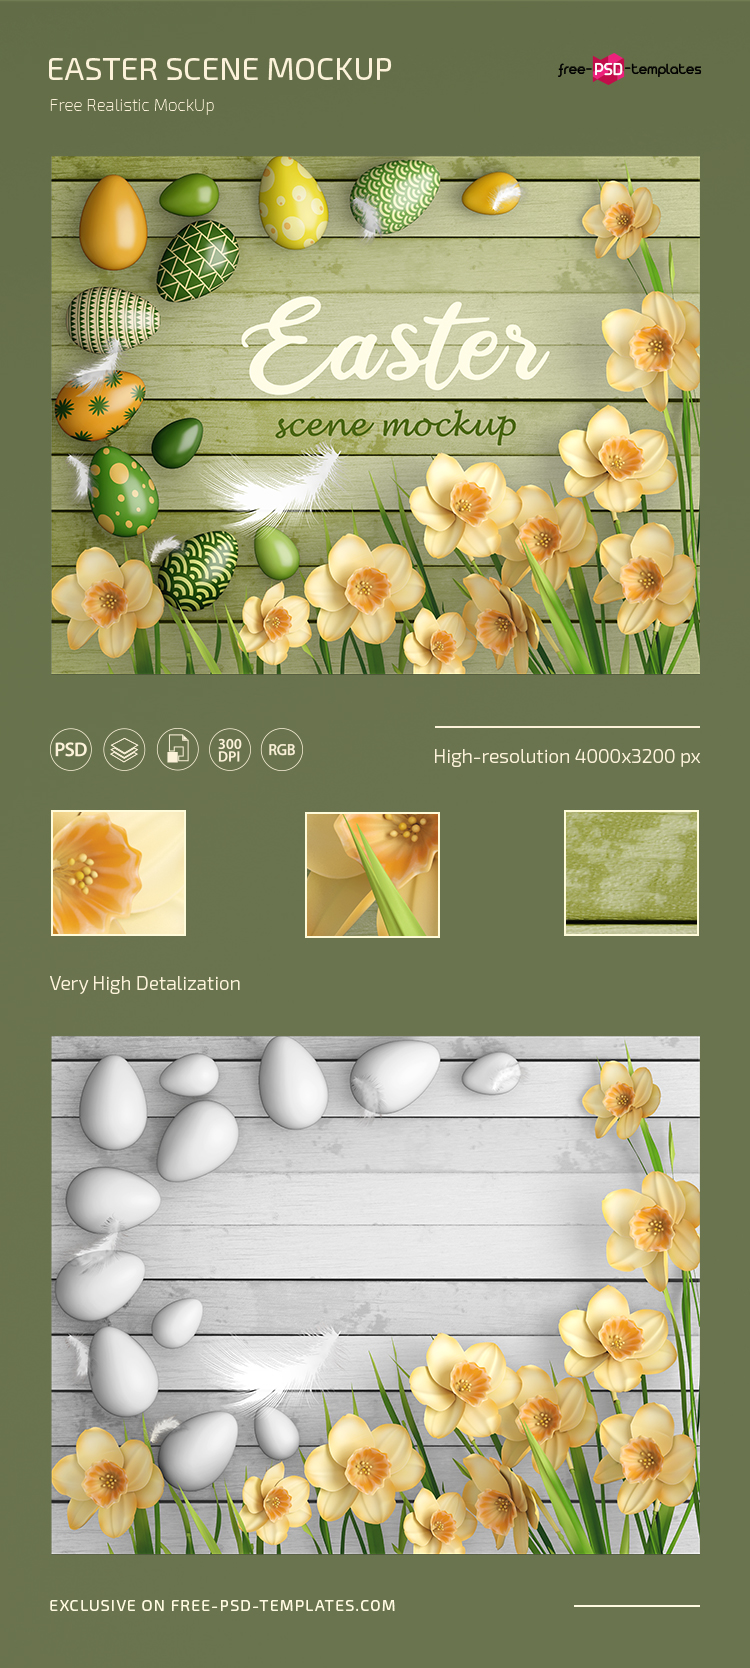 Download Free Easter Scene Mockup Templates in PSD | Free PSD Templates